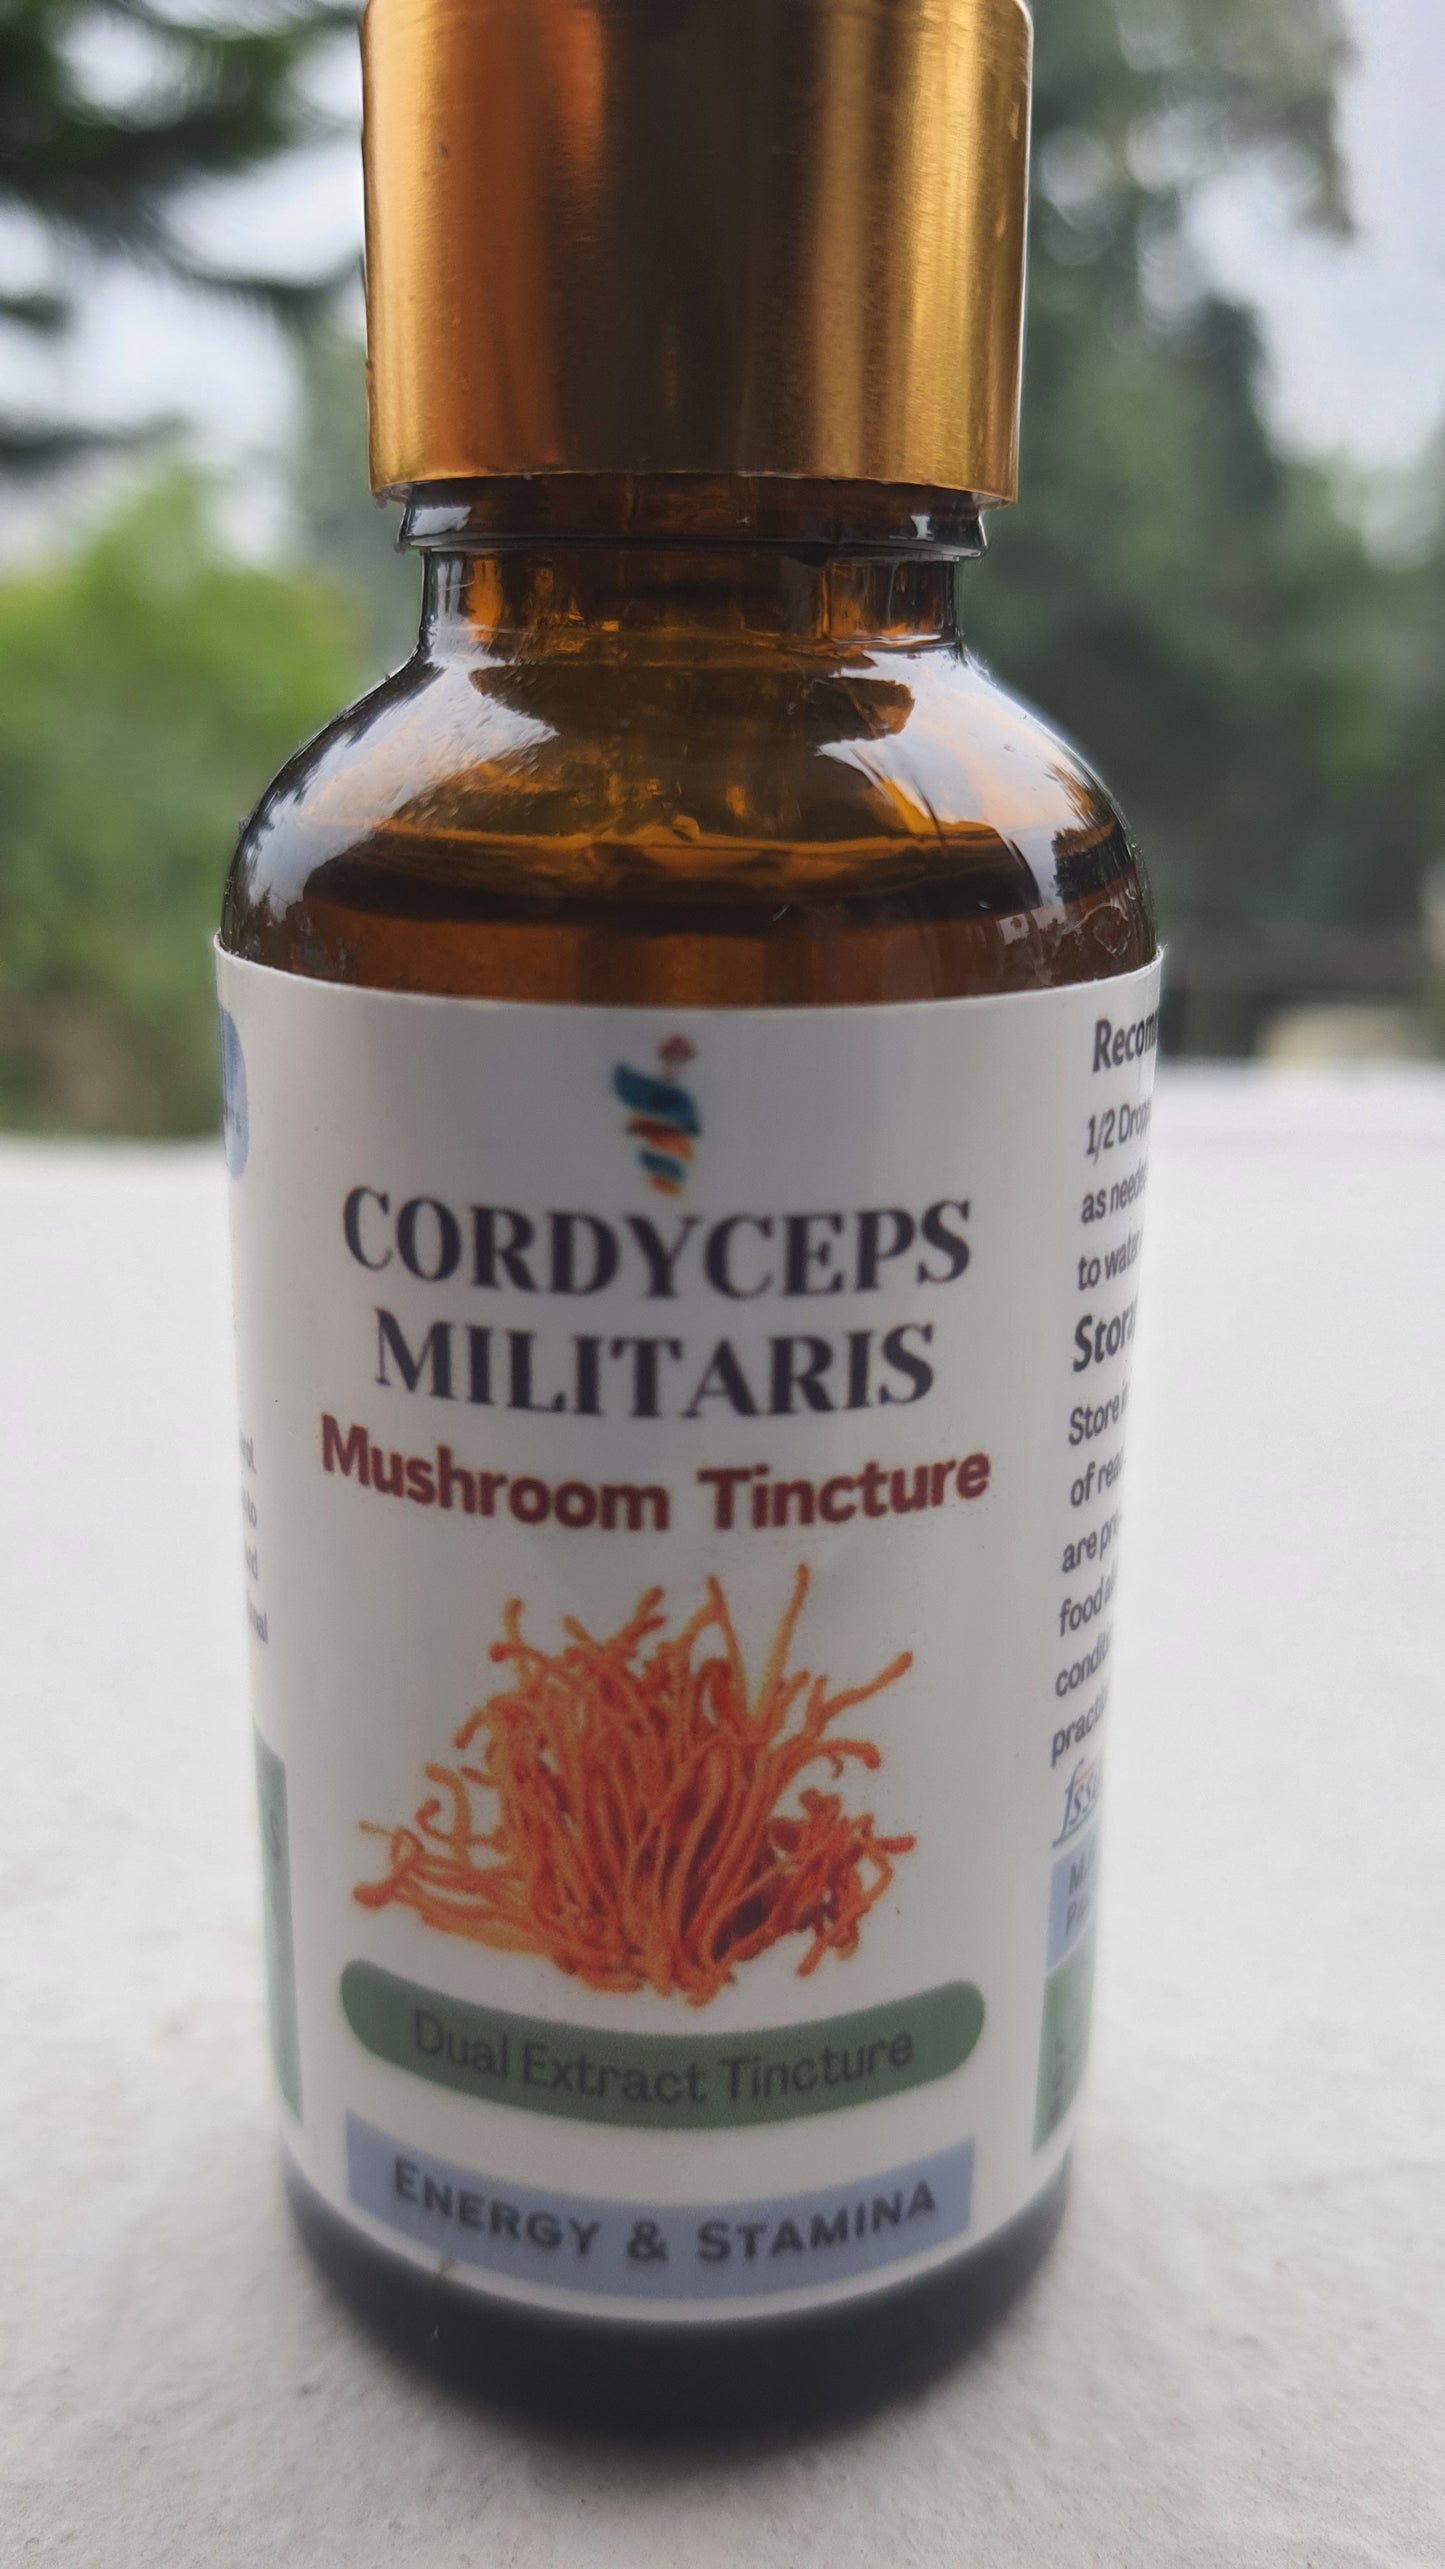 Cordyceps Mushroom Extract Tincture, Boosts Energy & Athletic Performance, 30ml Bottle, 60 Servings, Natural Supplement for Stamina and Endurance, Single Pack